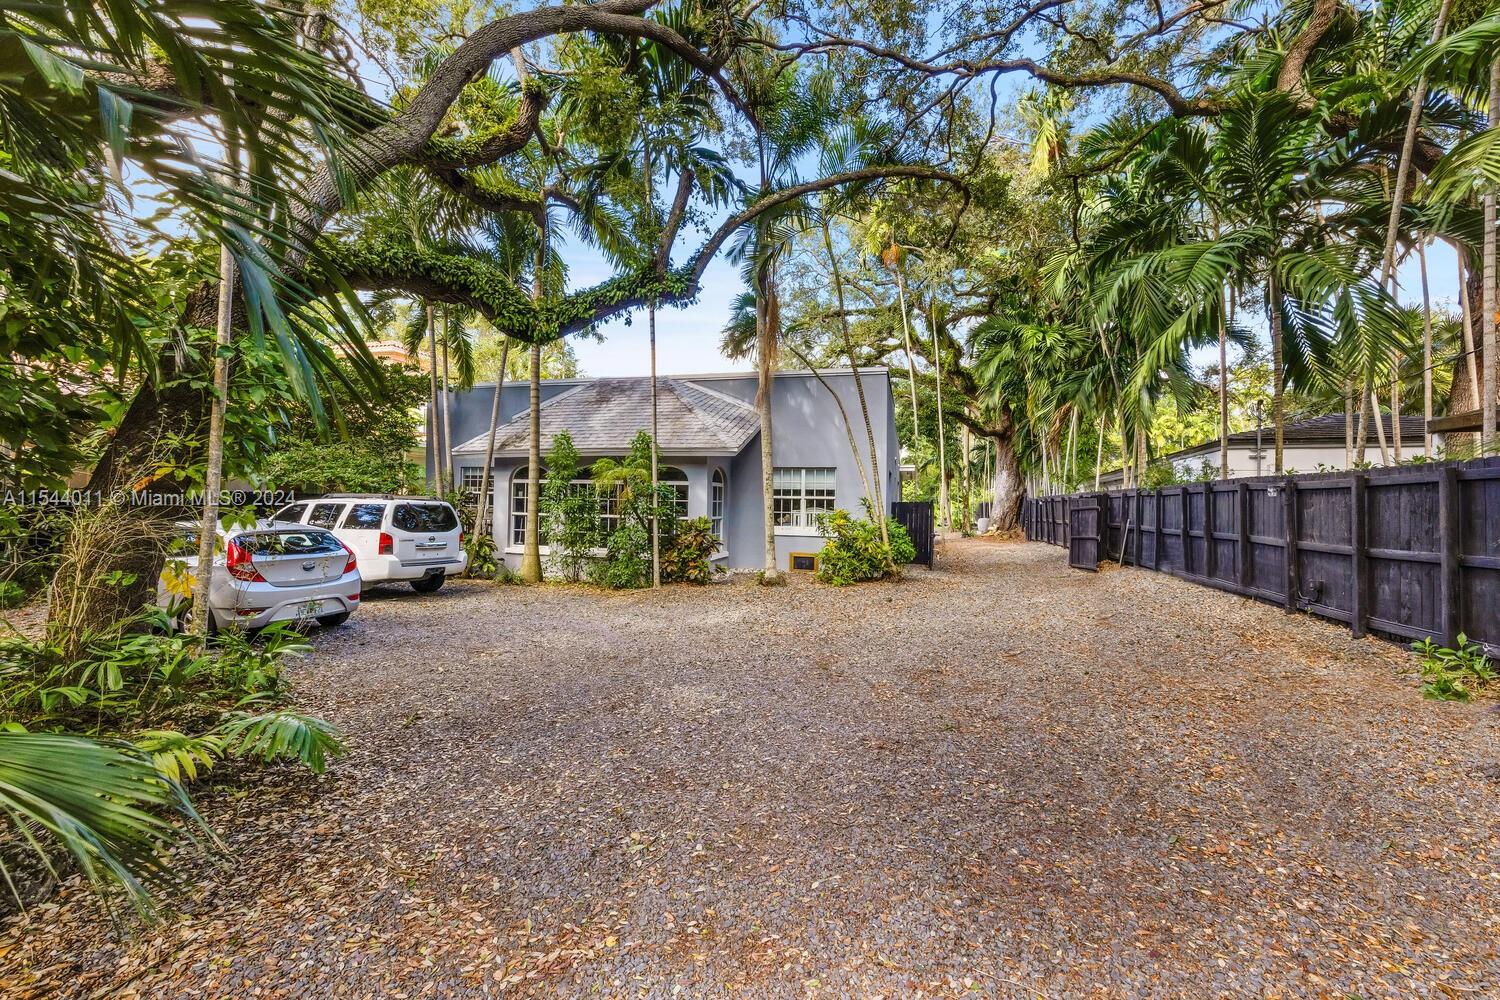 Live the Grove lifestyle on a captivating, tree-canopied North Grove street - just a short walk or bike ride to bayfront parks & marinas. Classic 1920’s home with 4BR/2.5BA. Expansive, one-half acre lot (21,600 SF). Freestanding 2-story garage has been converted into 3 living units that are in need of repair & renovation. Not in a flood zone (one of the highest sea-level elevations in South Florida) and close to the historic Grove village’s trendy galleries, boutiques & cafes. Also, ideally located just minutes from downtown, MIA, Coral Gables, Key Biscayne & the Beaches. Renovate & expand or build new construction home.